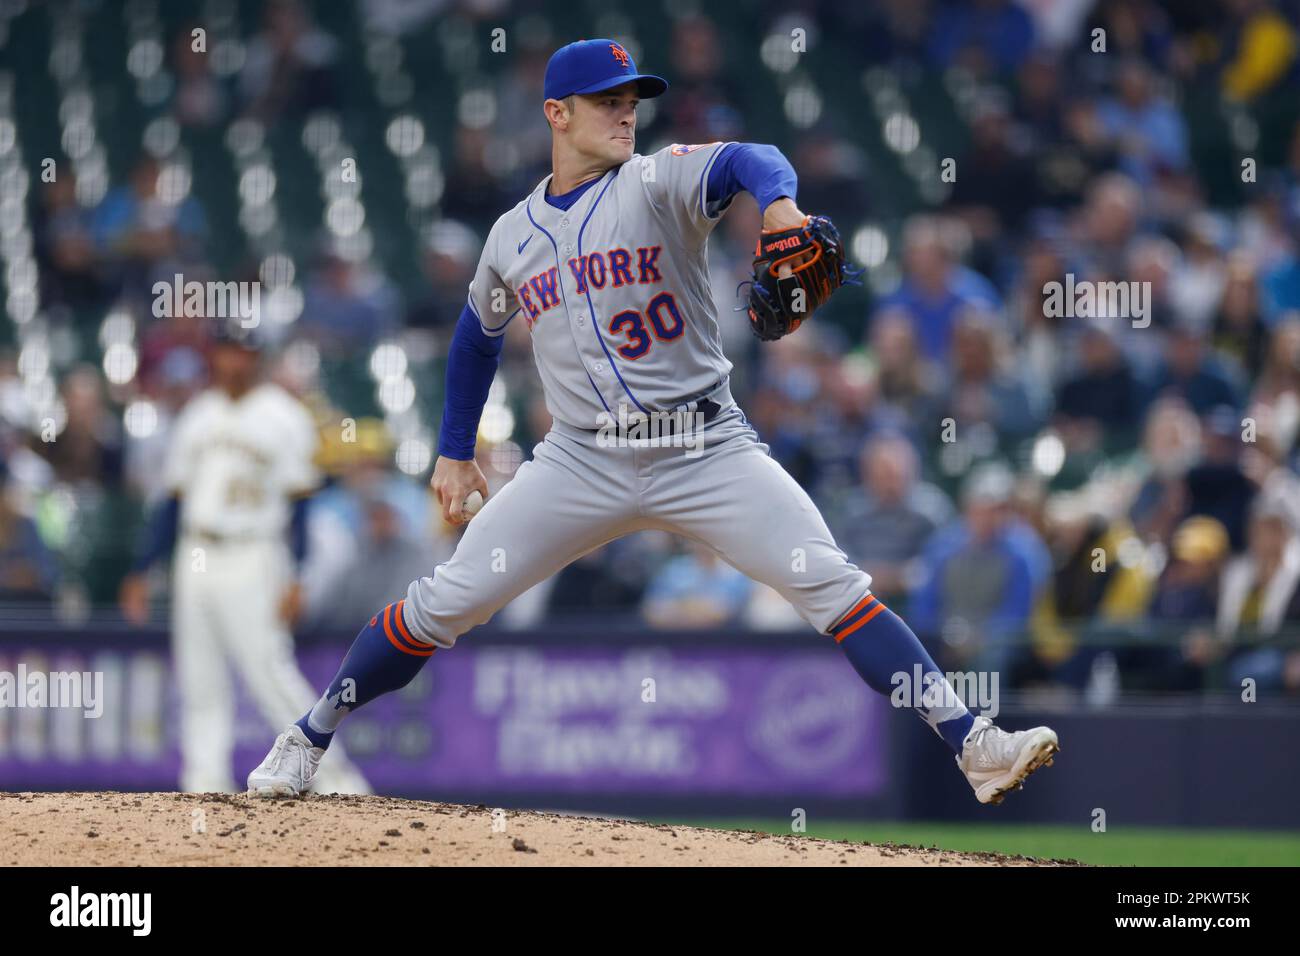 MILWAUKEE, WI - APRIL 05: New York Mets relief pitcher David Robertson (30)  delivers a pitch during an MLB game against the Milwaukee Brewers on April  05, 2023 at American Family Field